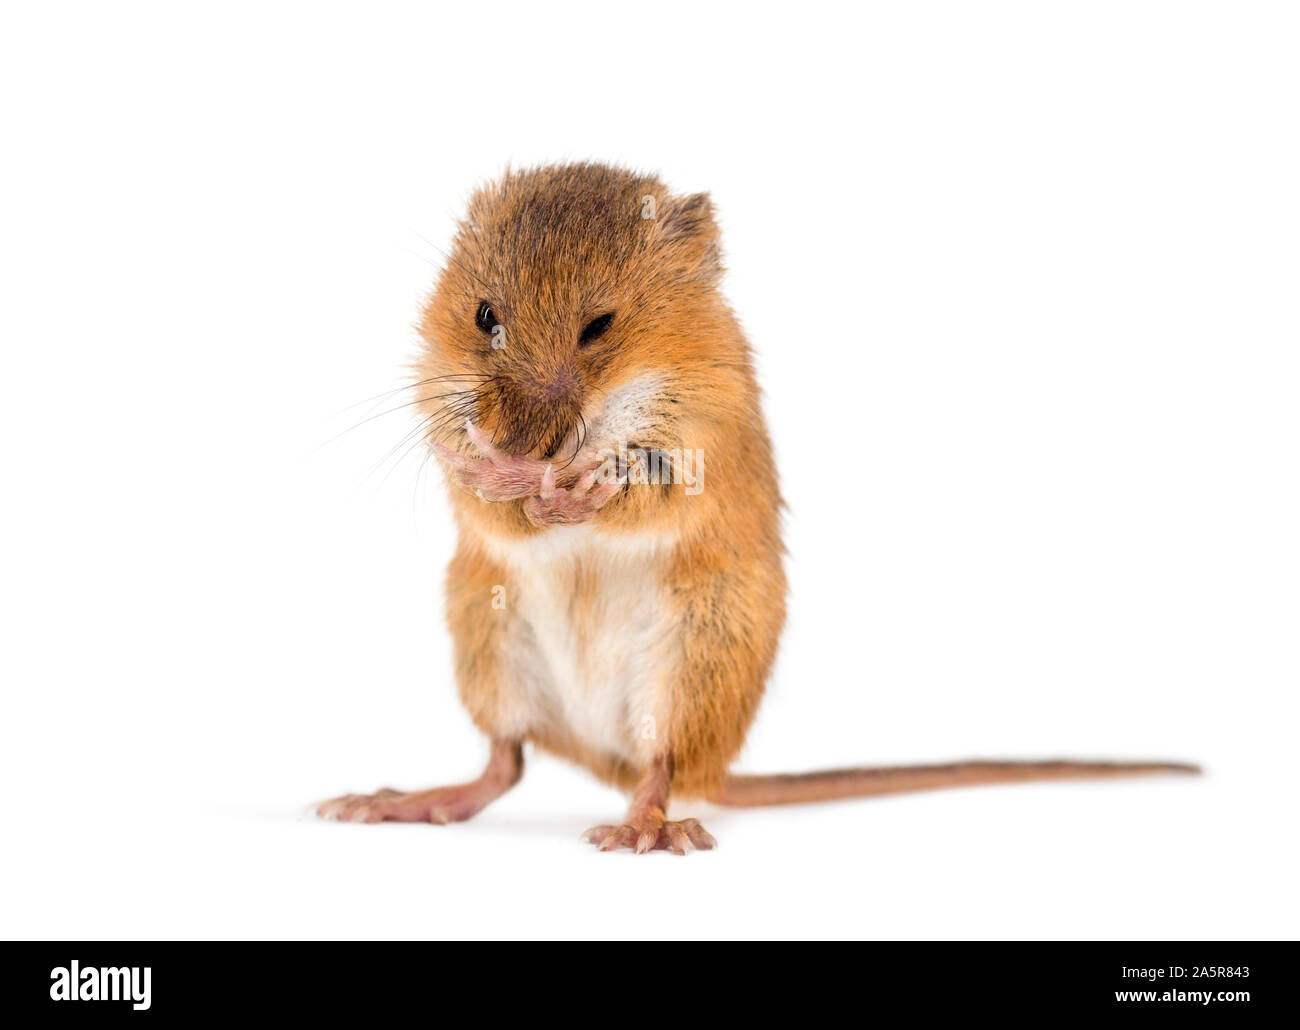 Eurasian harvest mouse, Micromys minutus, grooming in front of white background Stock Photo